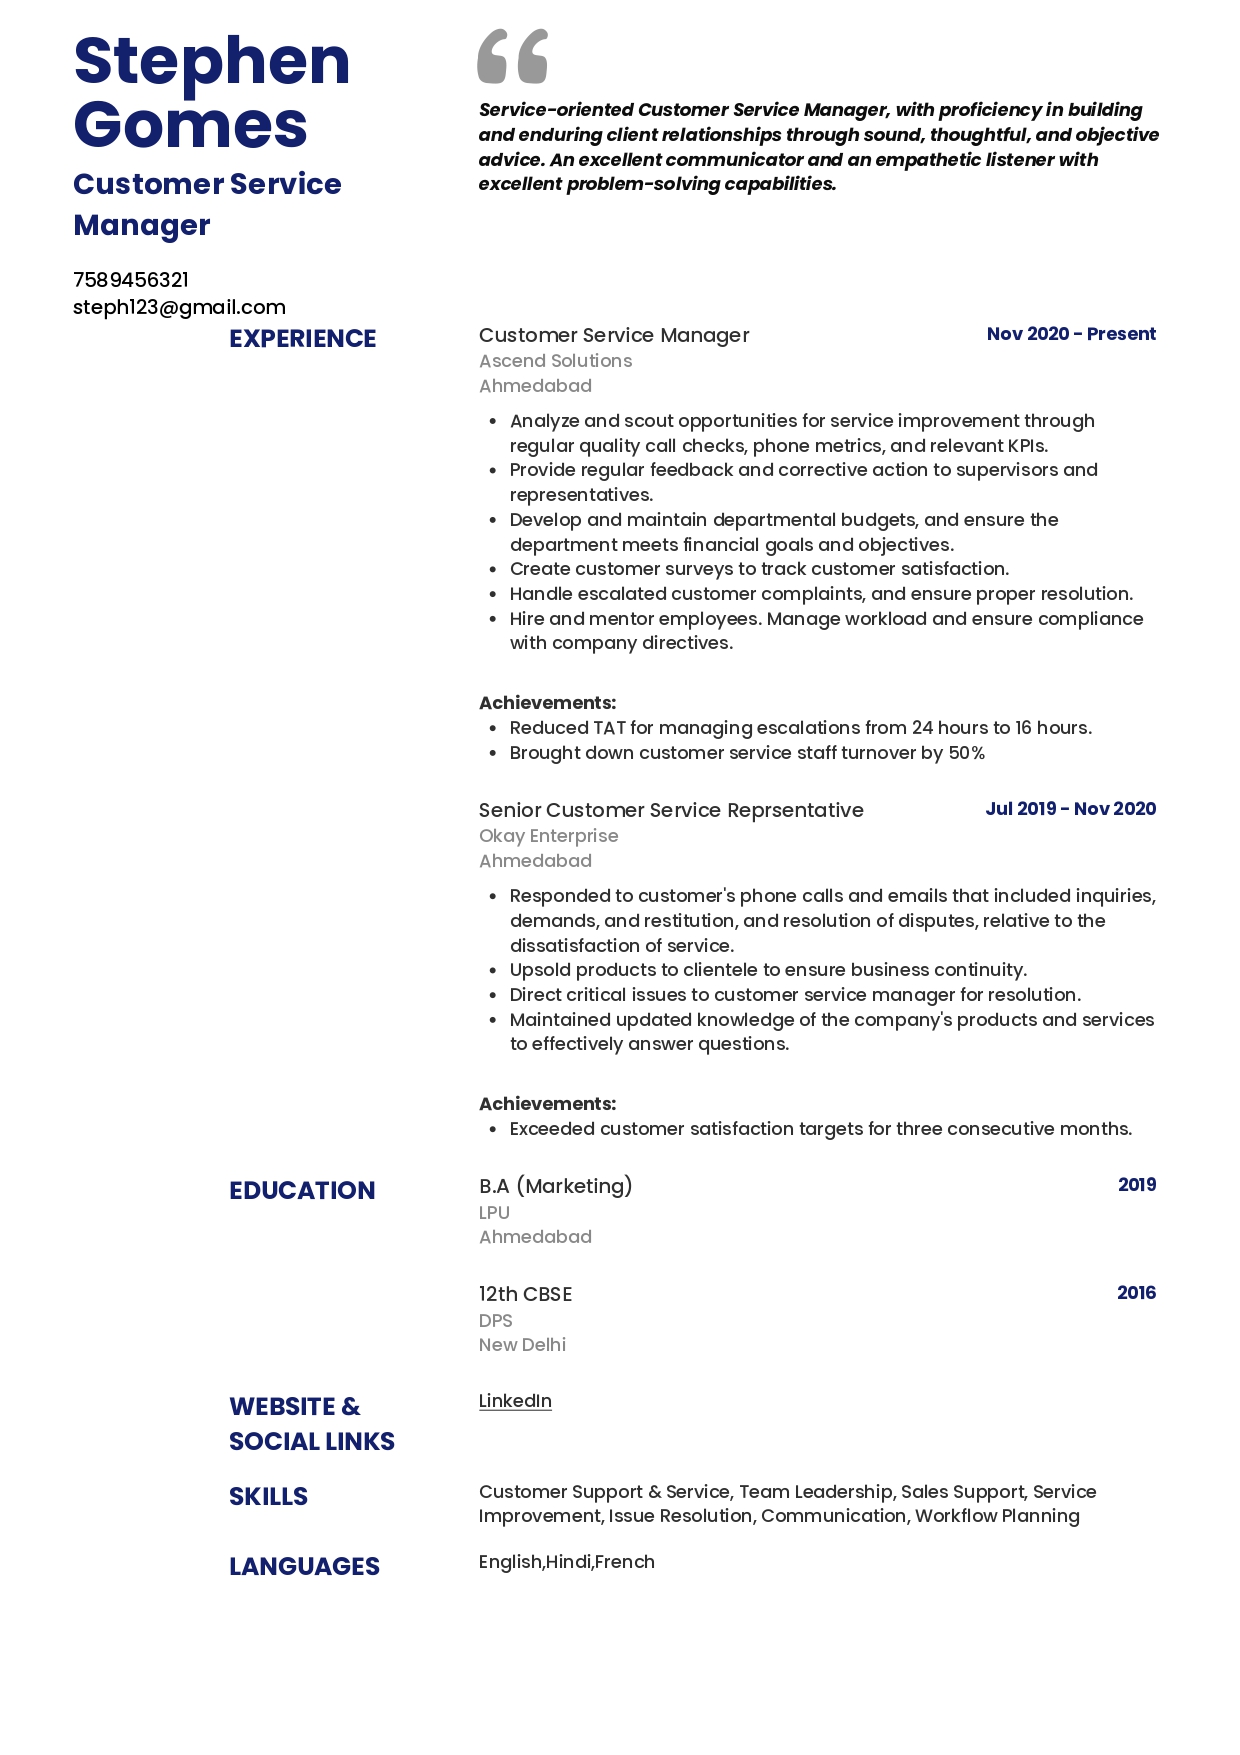 Sample Resume of Customer Service Manager | Free Resume Templates & Samples on Resumod.co